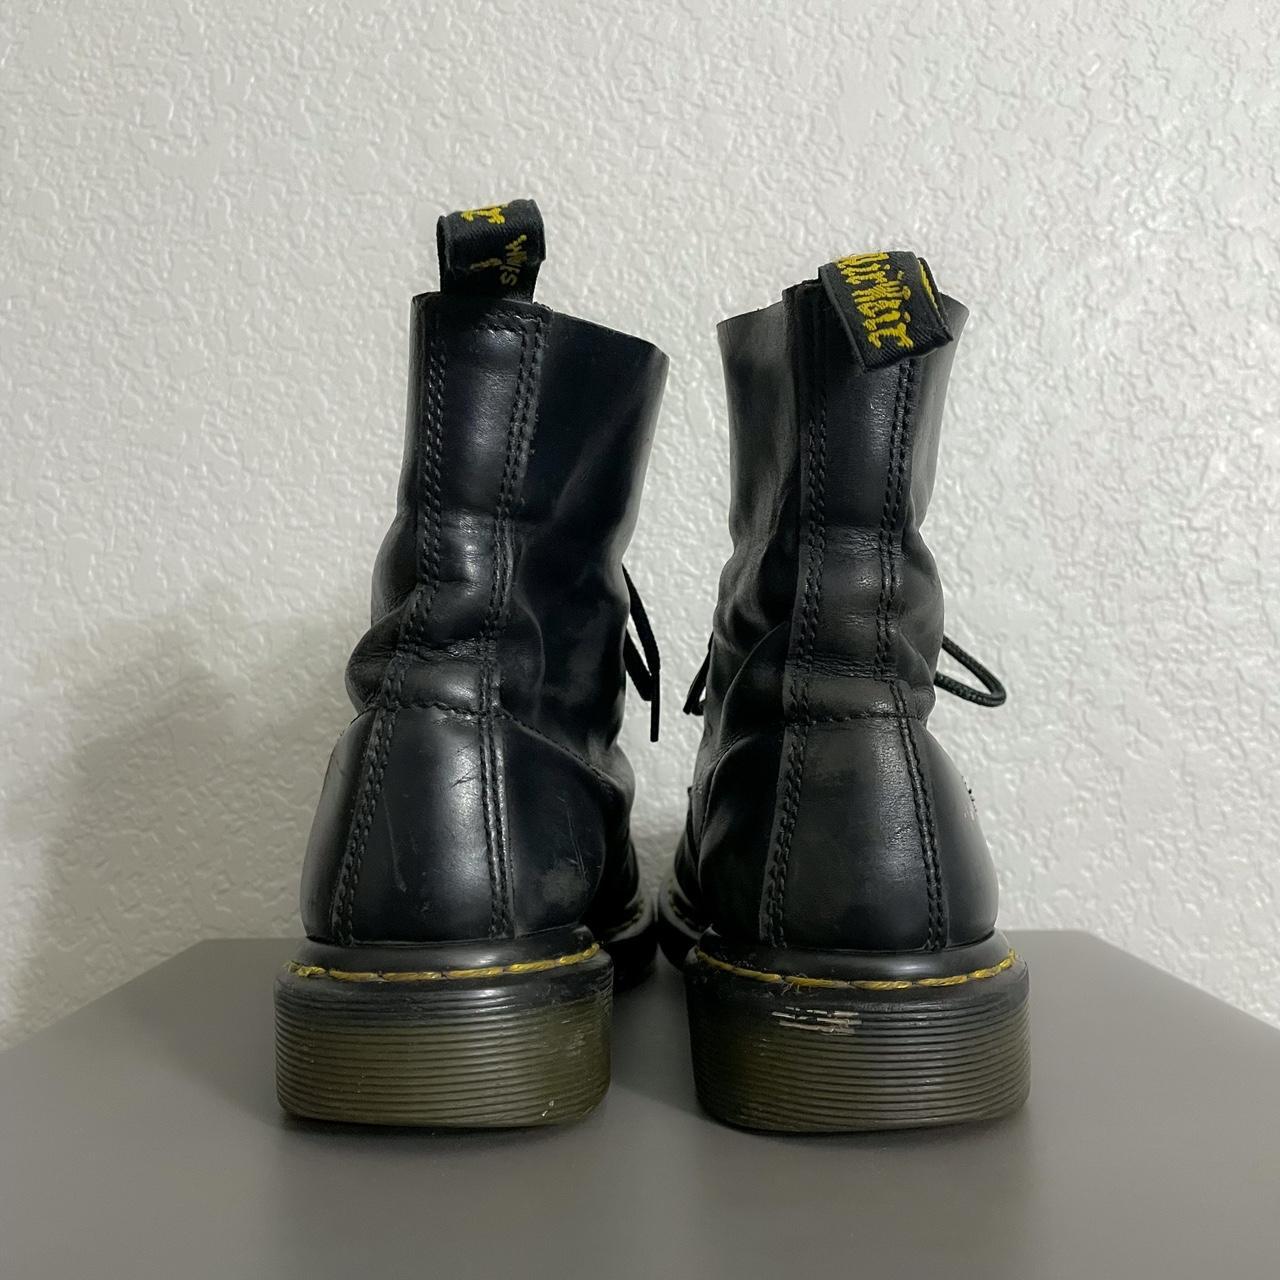 Dr. Martens Men's Black and Yellow Boots (3)